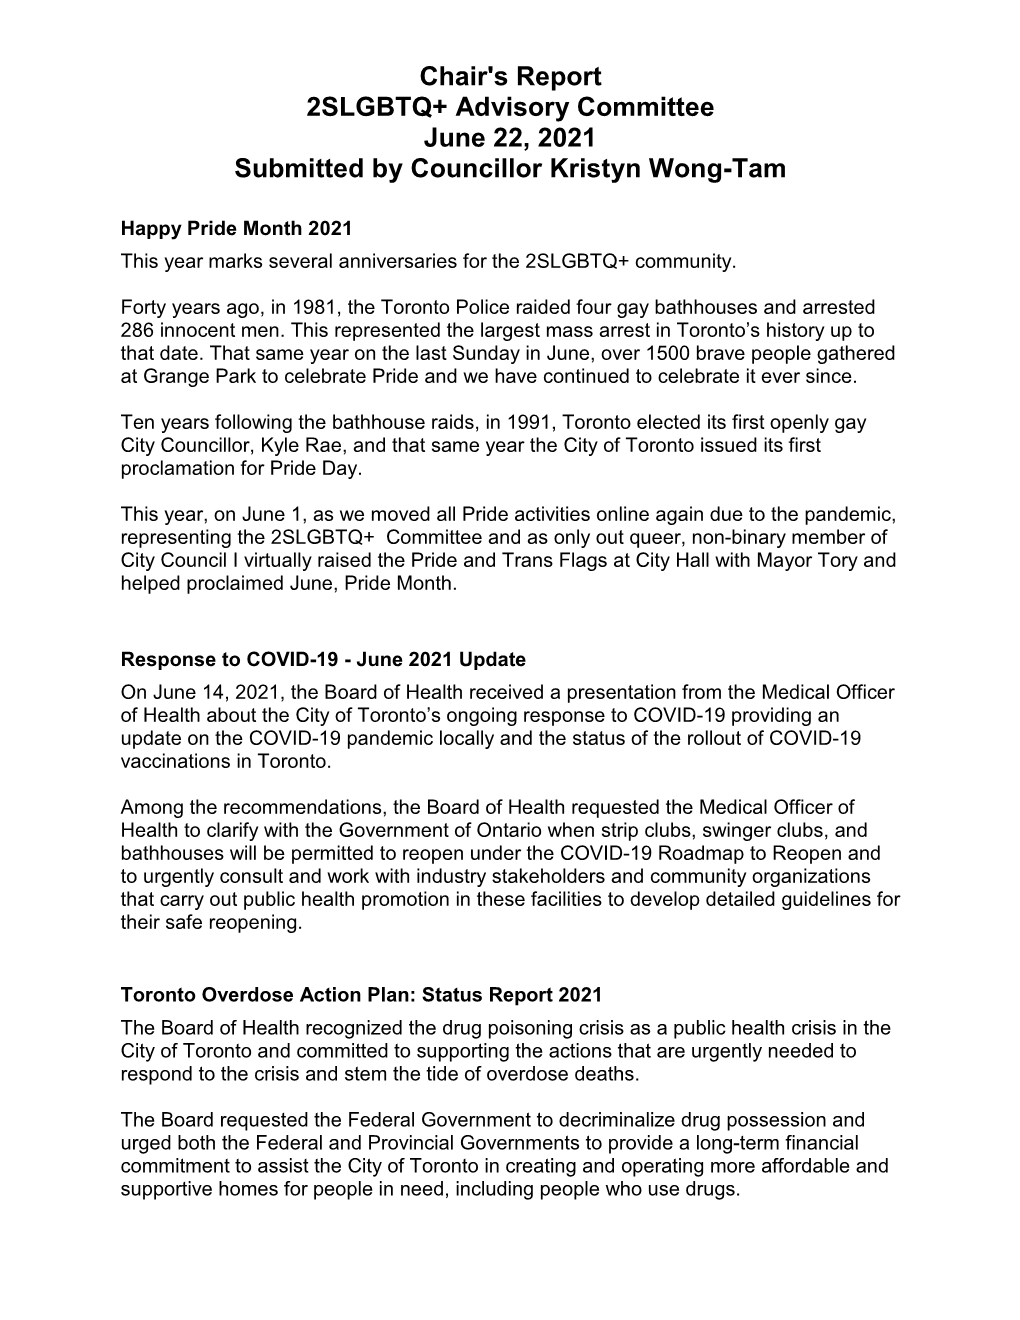 Chair's Report 2SLGBTQ+ Advisory Committee June 22, 2021 Submitted by Councillor Kristyn Wong-Tam